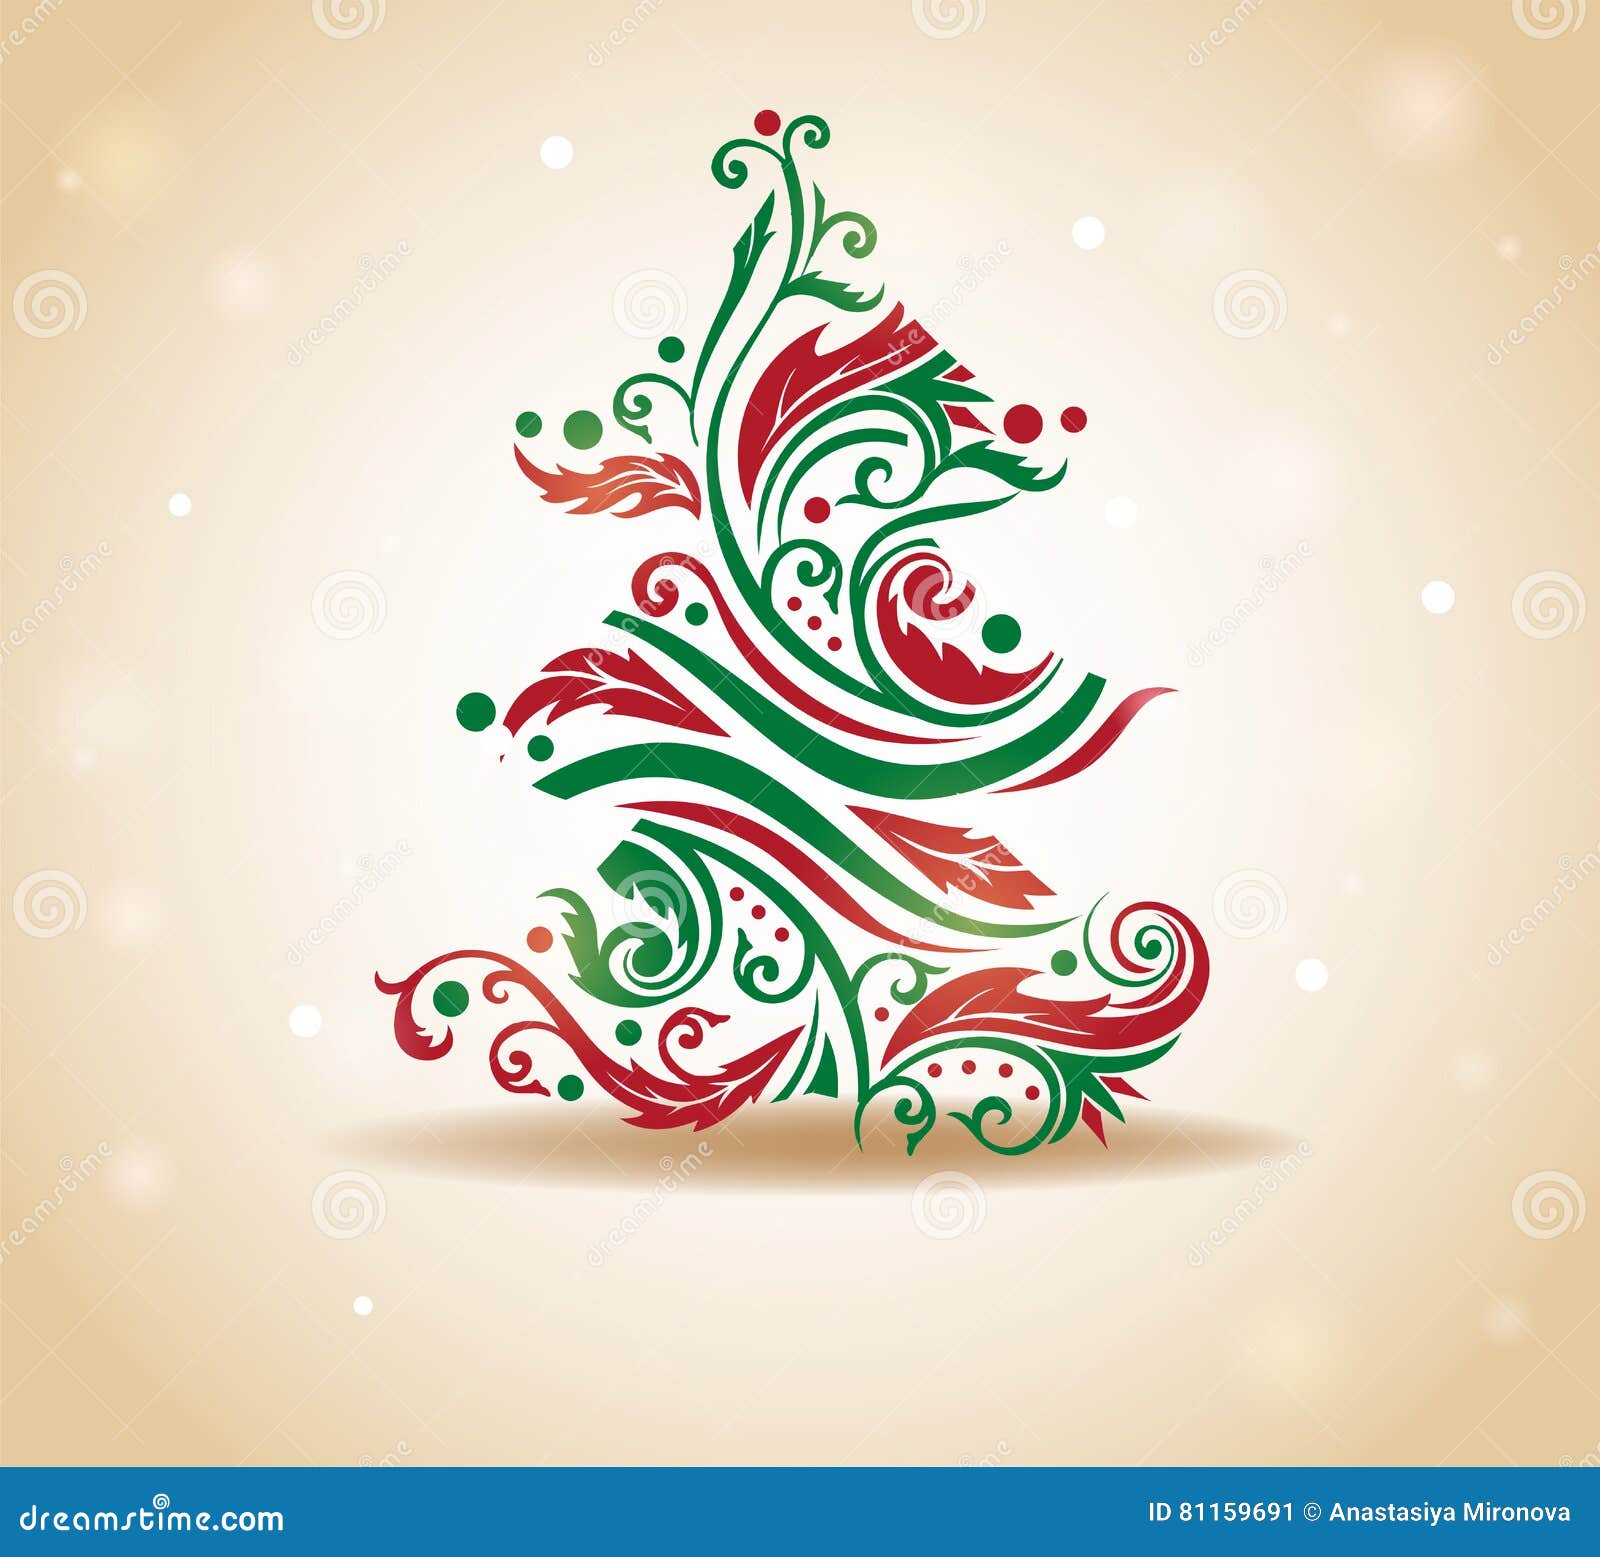 Curly Christmas tree. stock vector. Illustration of holiday - 81159691